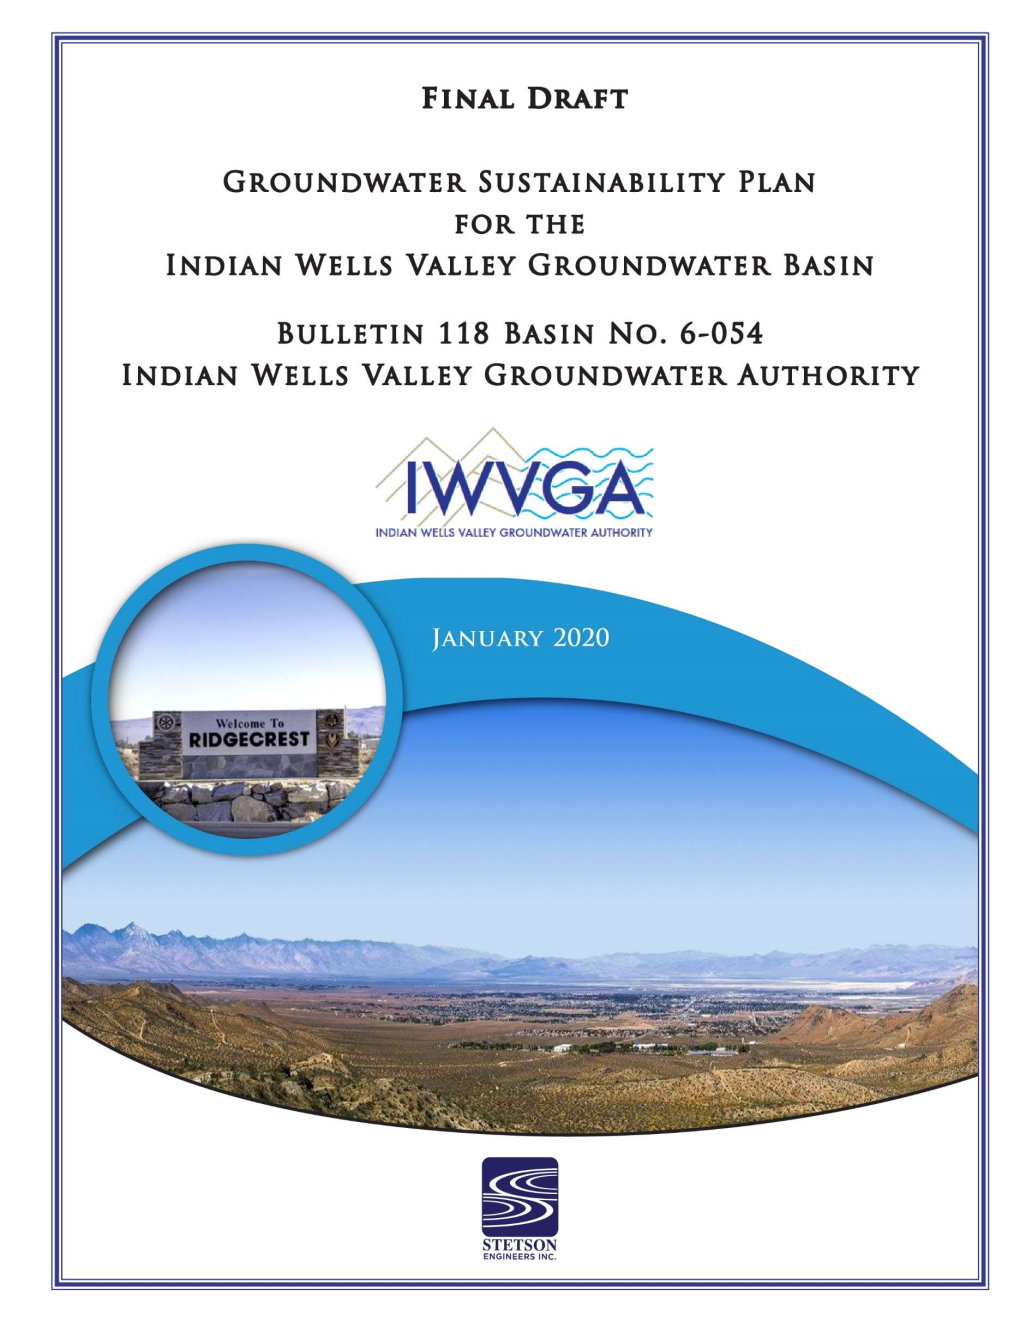 Groundwater Sustainability Plan